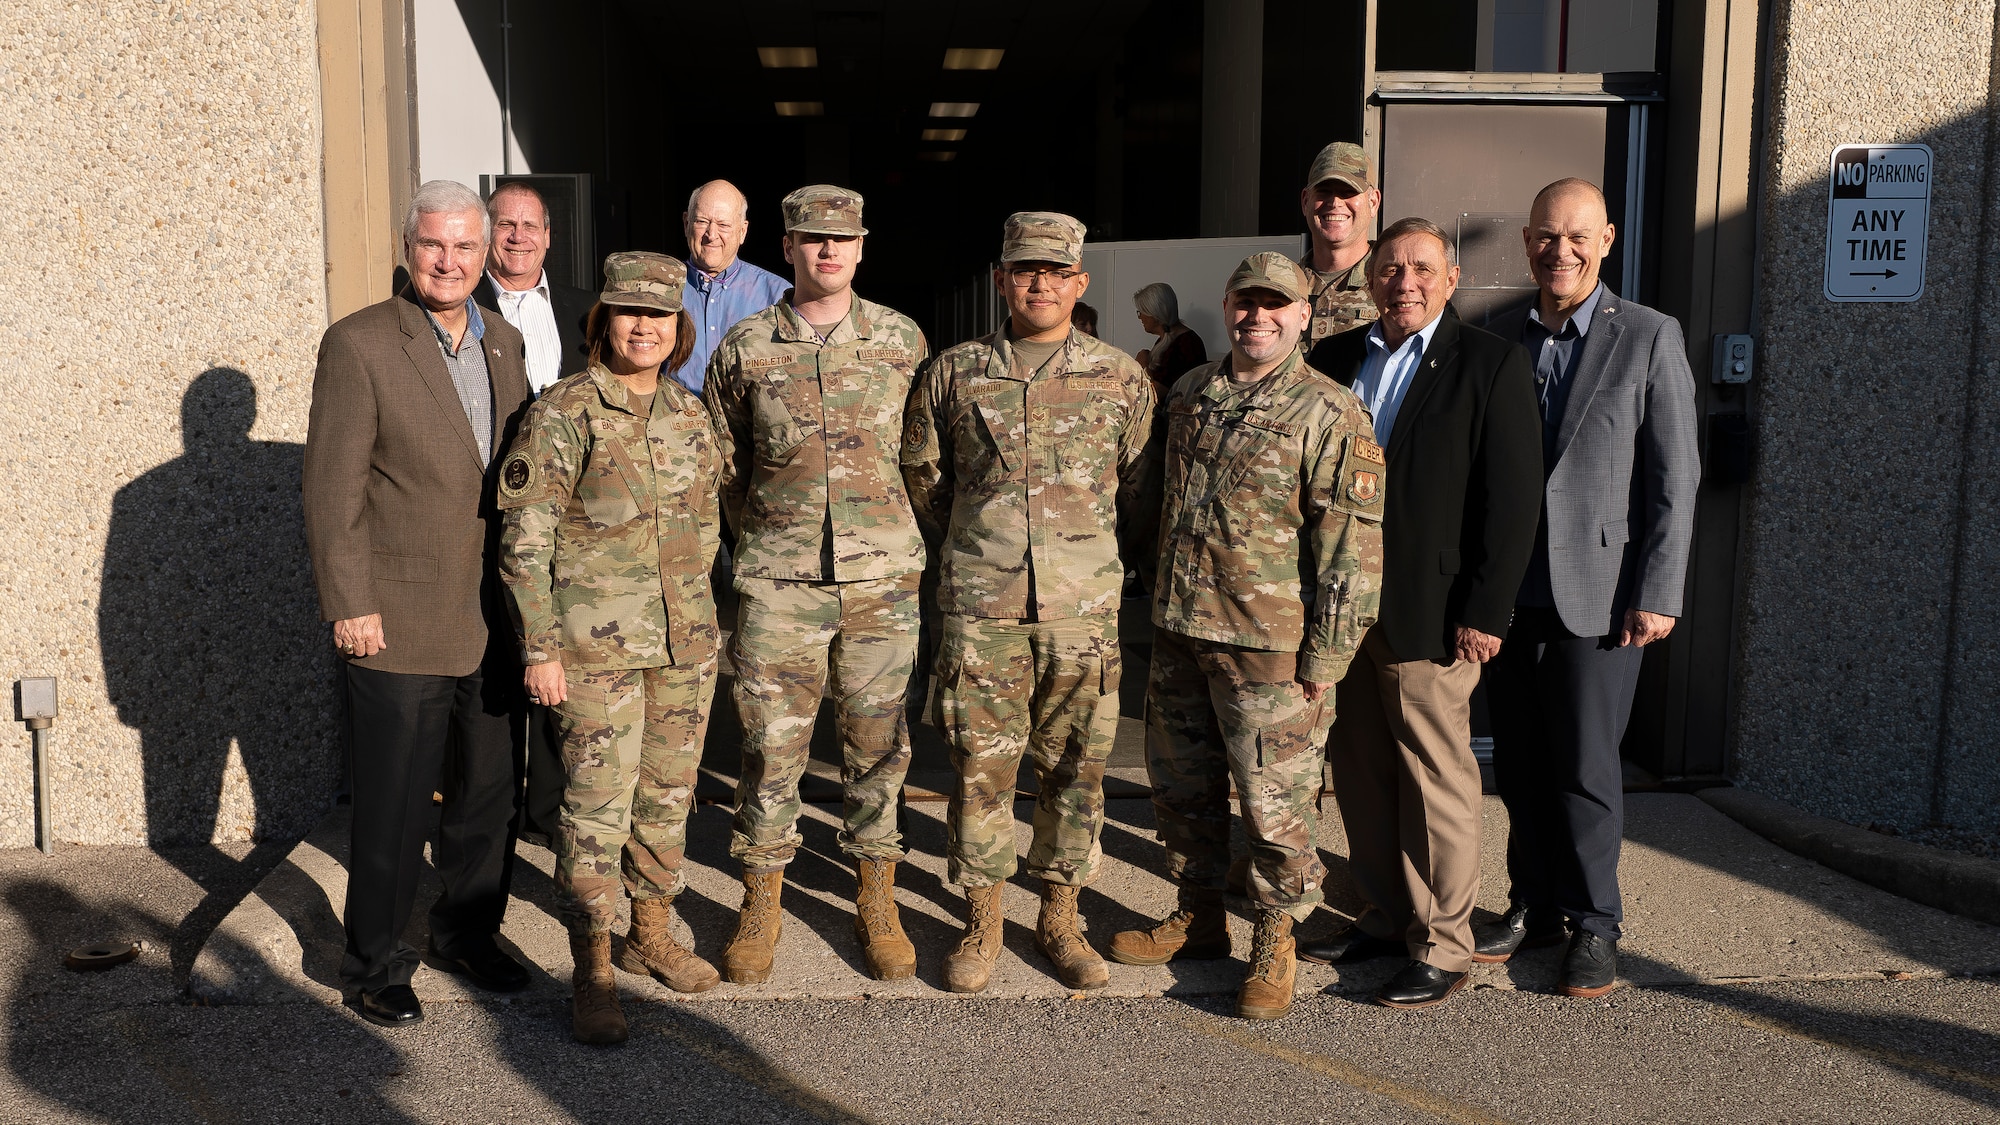 Chief Master Sgt. of the Air Force JoAnne Bass, second from left, stands with Airmen and other distinguished visitors following a drone program brief during a visit to Wright-Patterson Air Force Base Nov. 9, 2023. During her visit, Bass toured the Air Force Research Laboratory’s 711th Human Performance Wing. (U.S. Air Force photo / Keith Lewis)